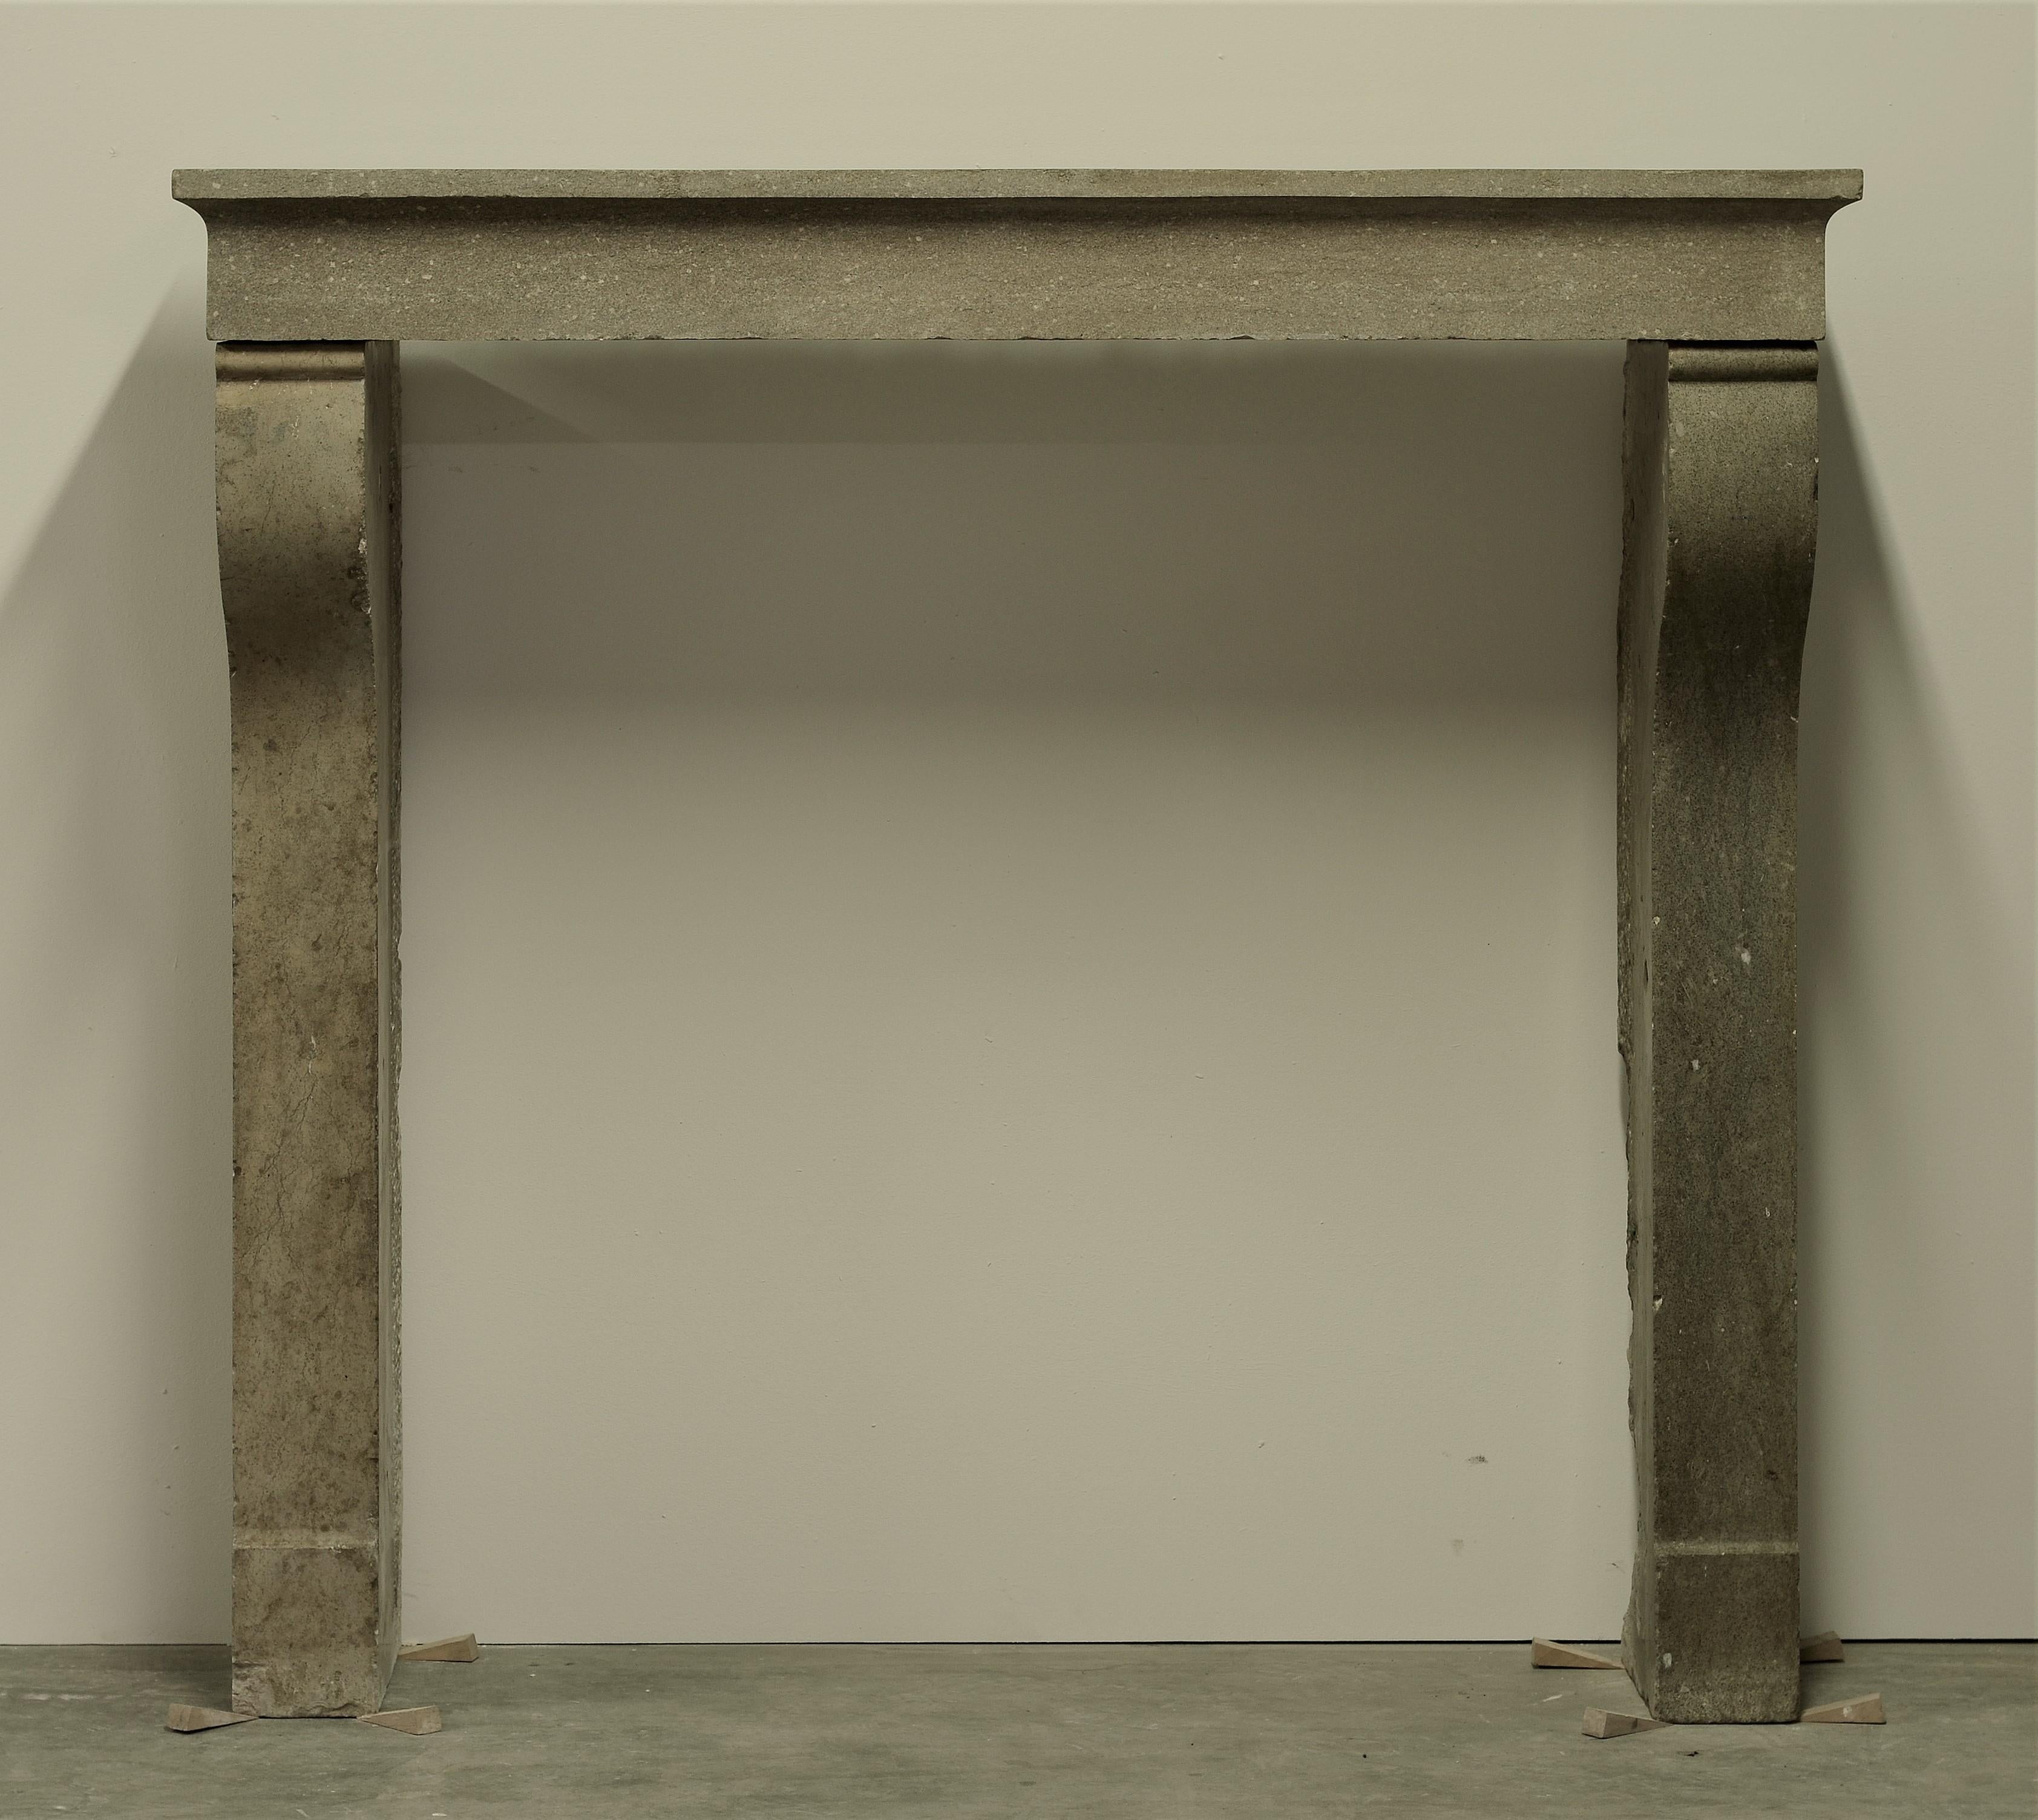 Antique fireplace mantel from the countryside in France, 19th century.
Beautiful well proportioned gray limestone mantelpiece, great condition.

Ready to be shipped and installed.